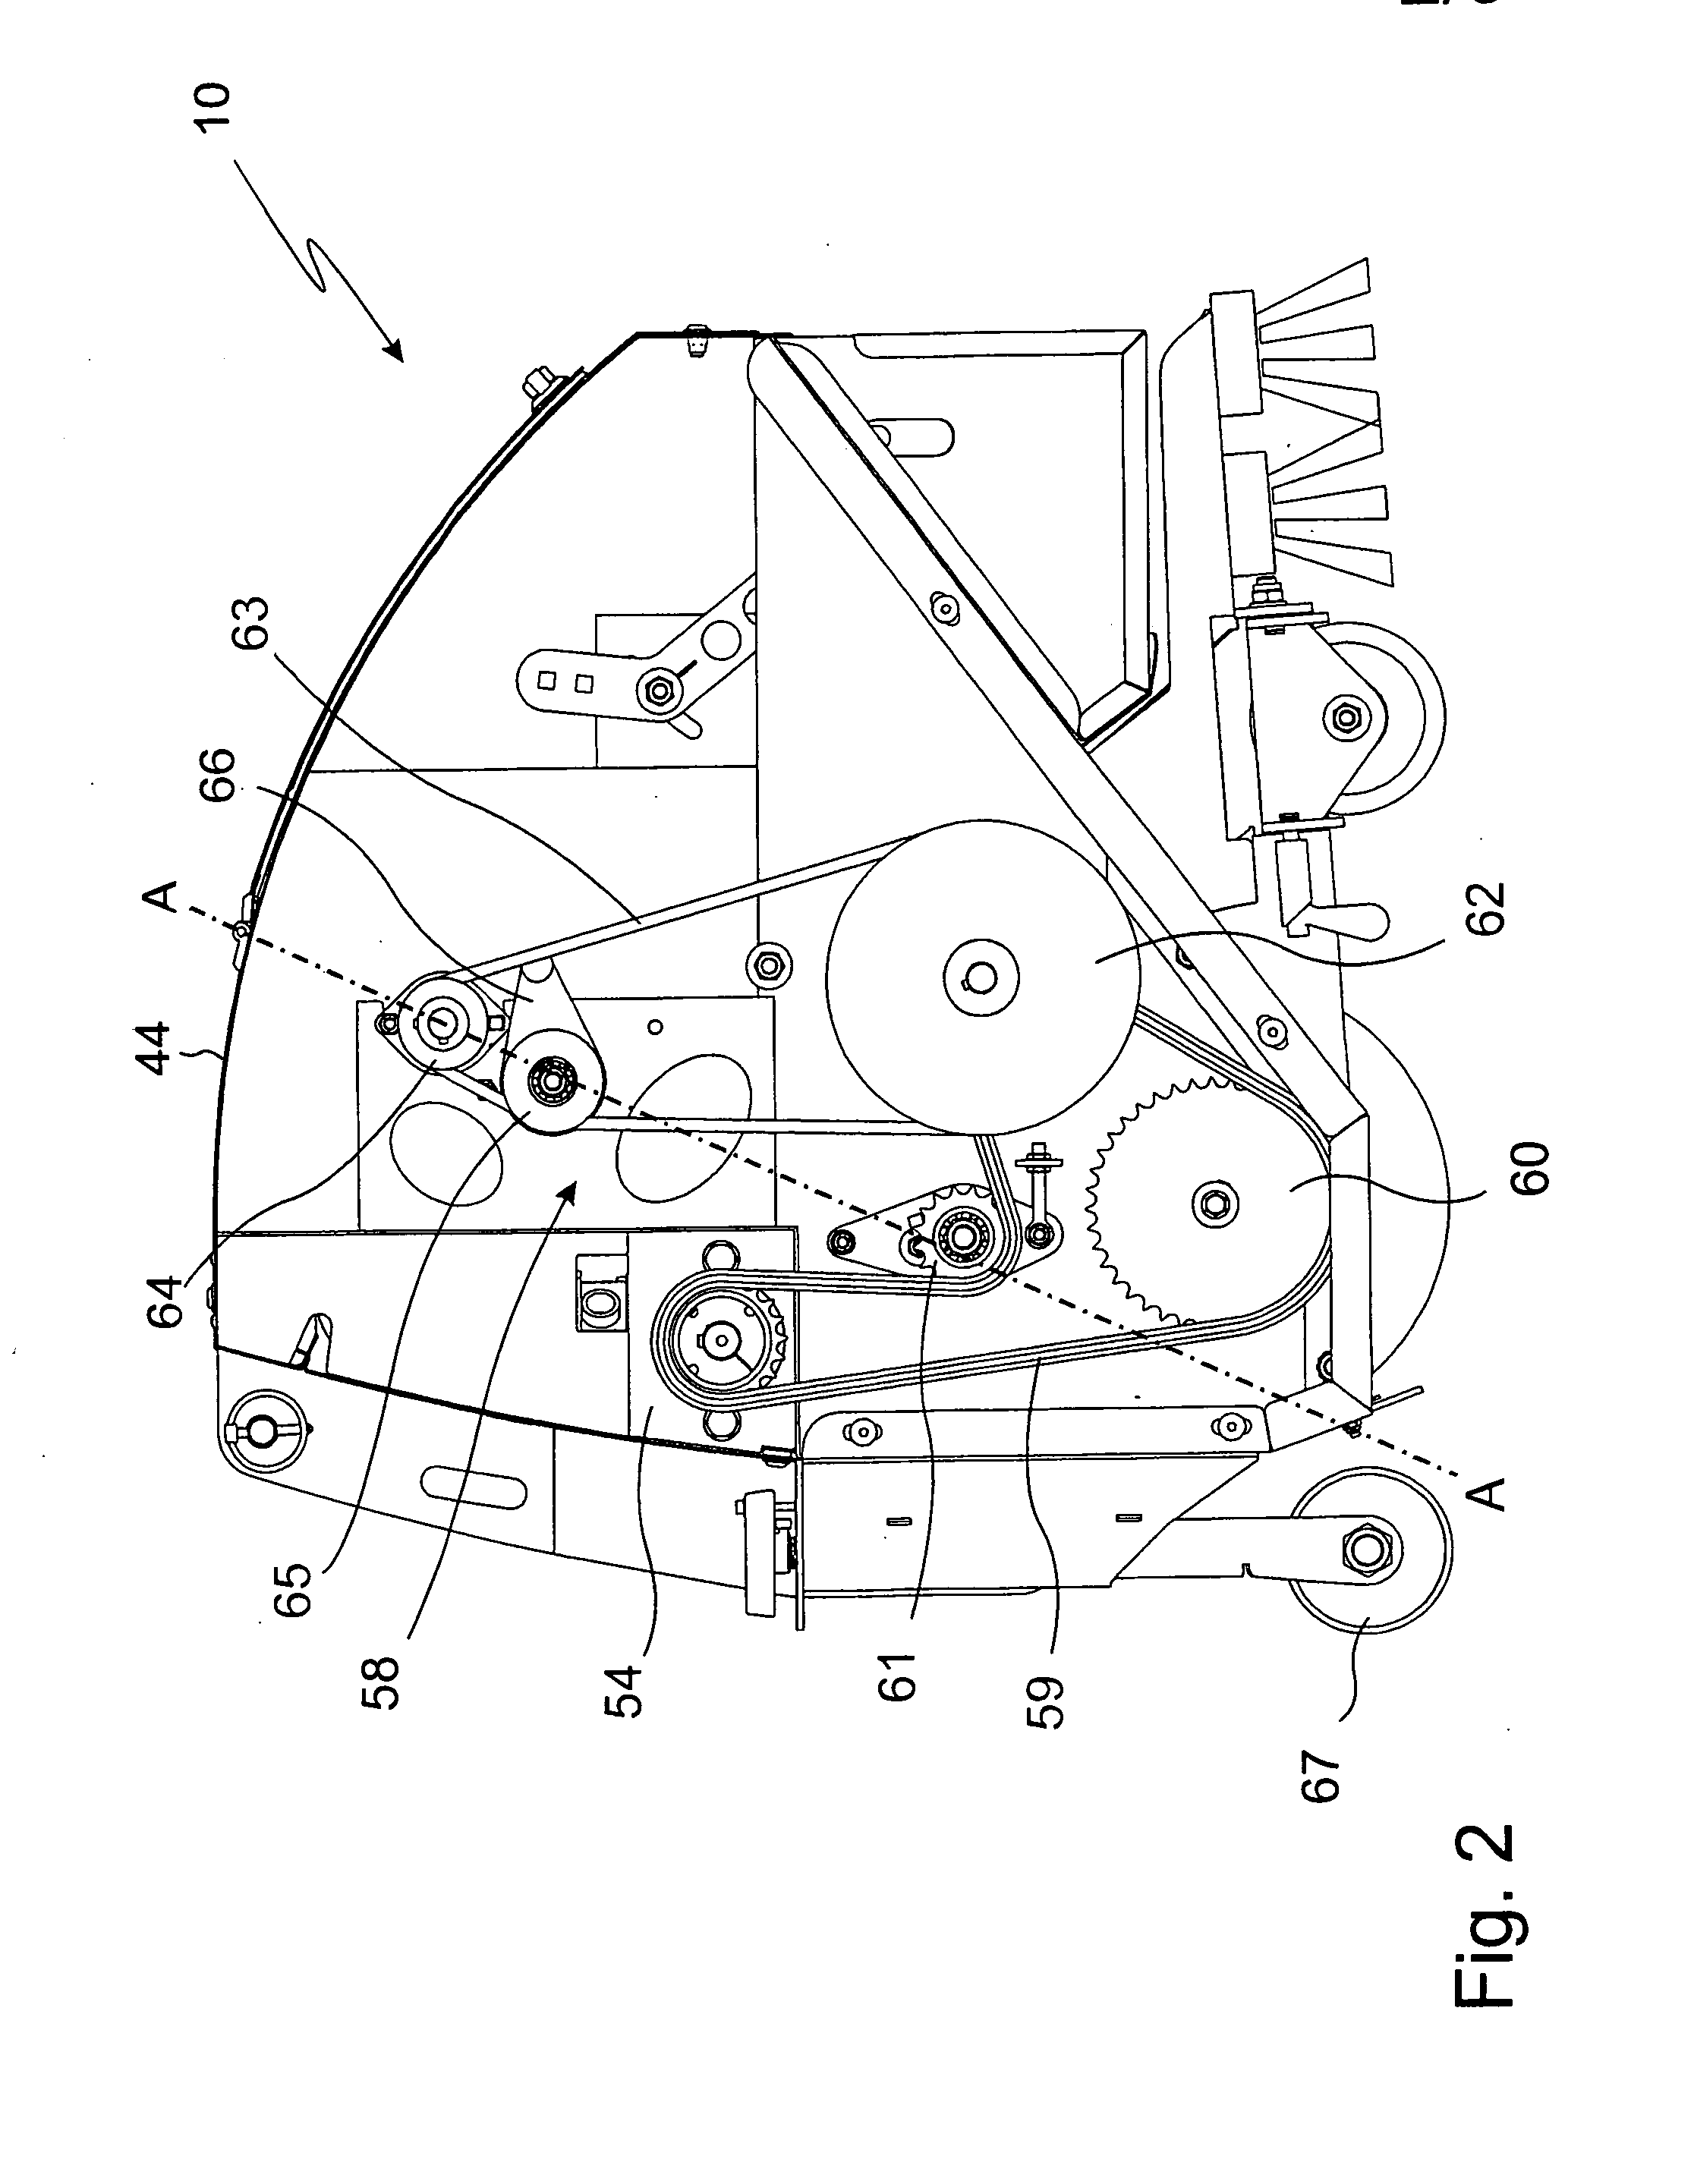 Driving device for taking away filling material from a surface